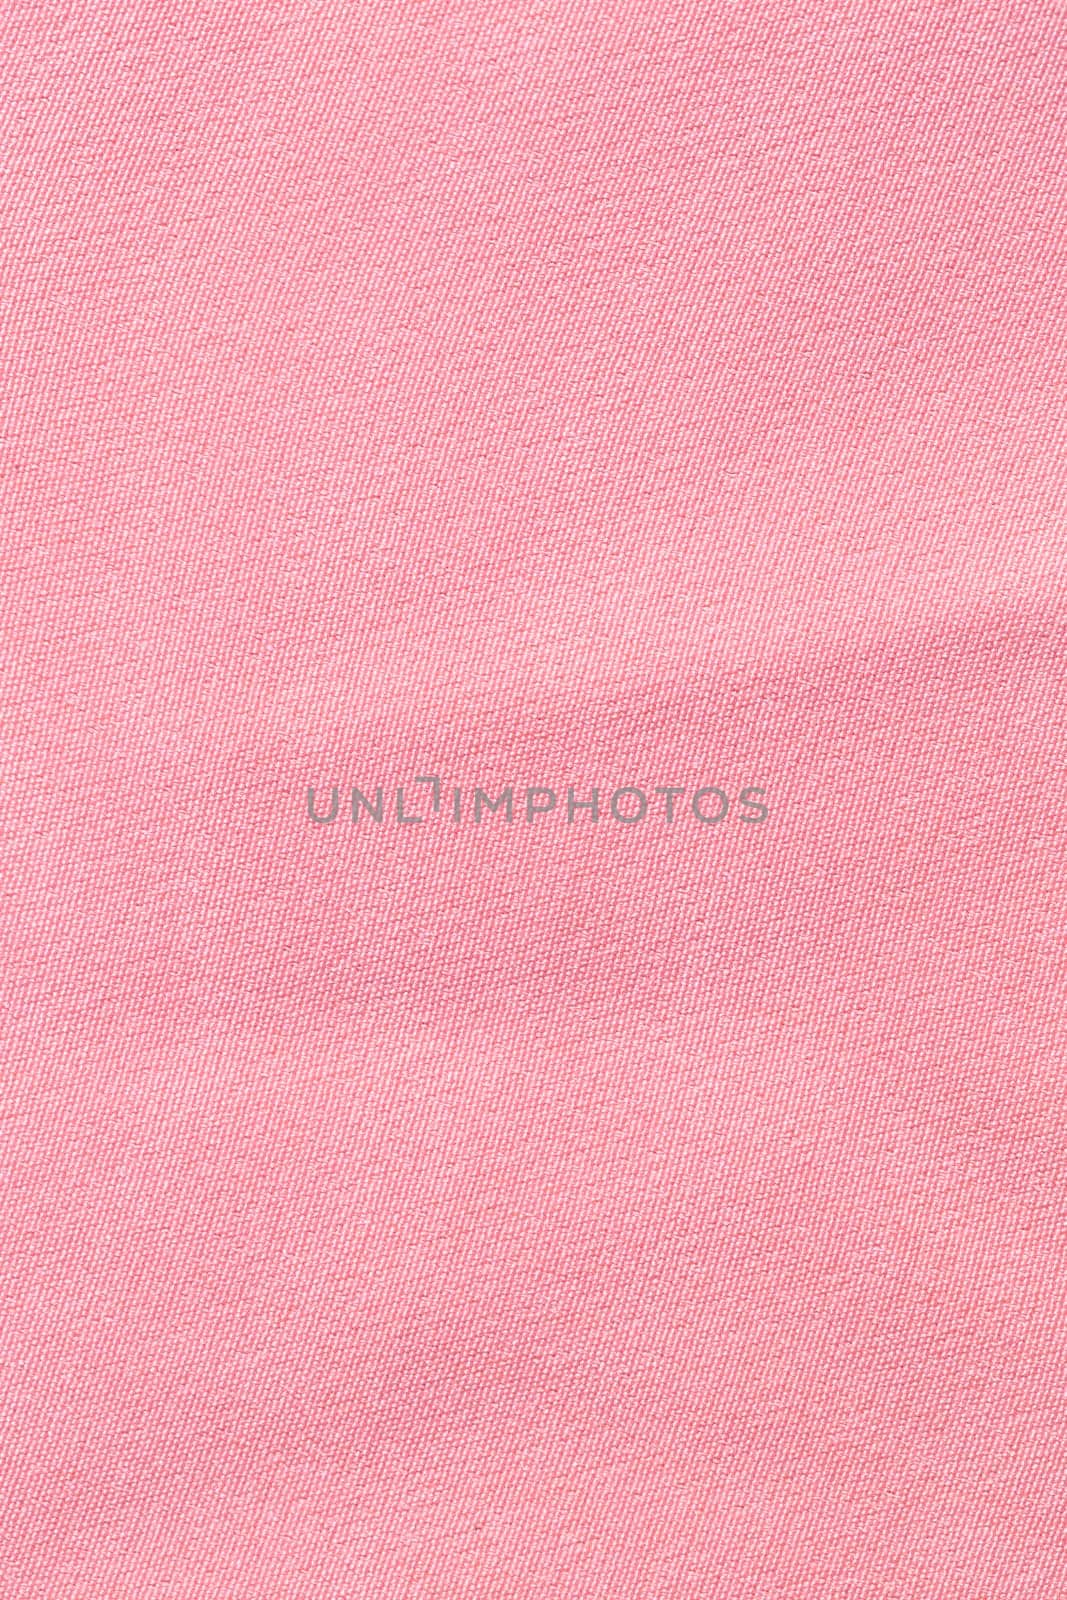 The Pink linen pastel fabric, background or texture. by Gamjai